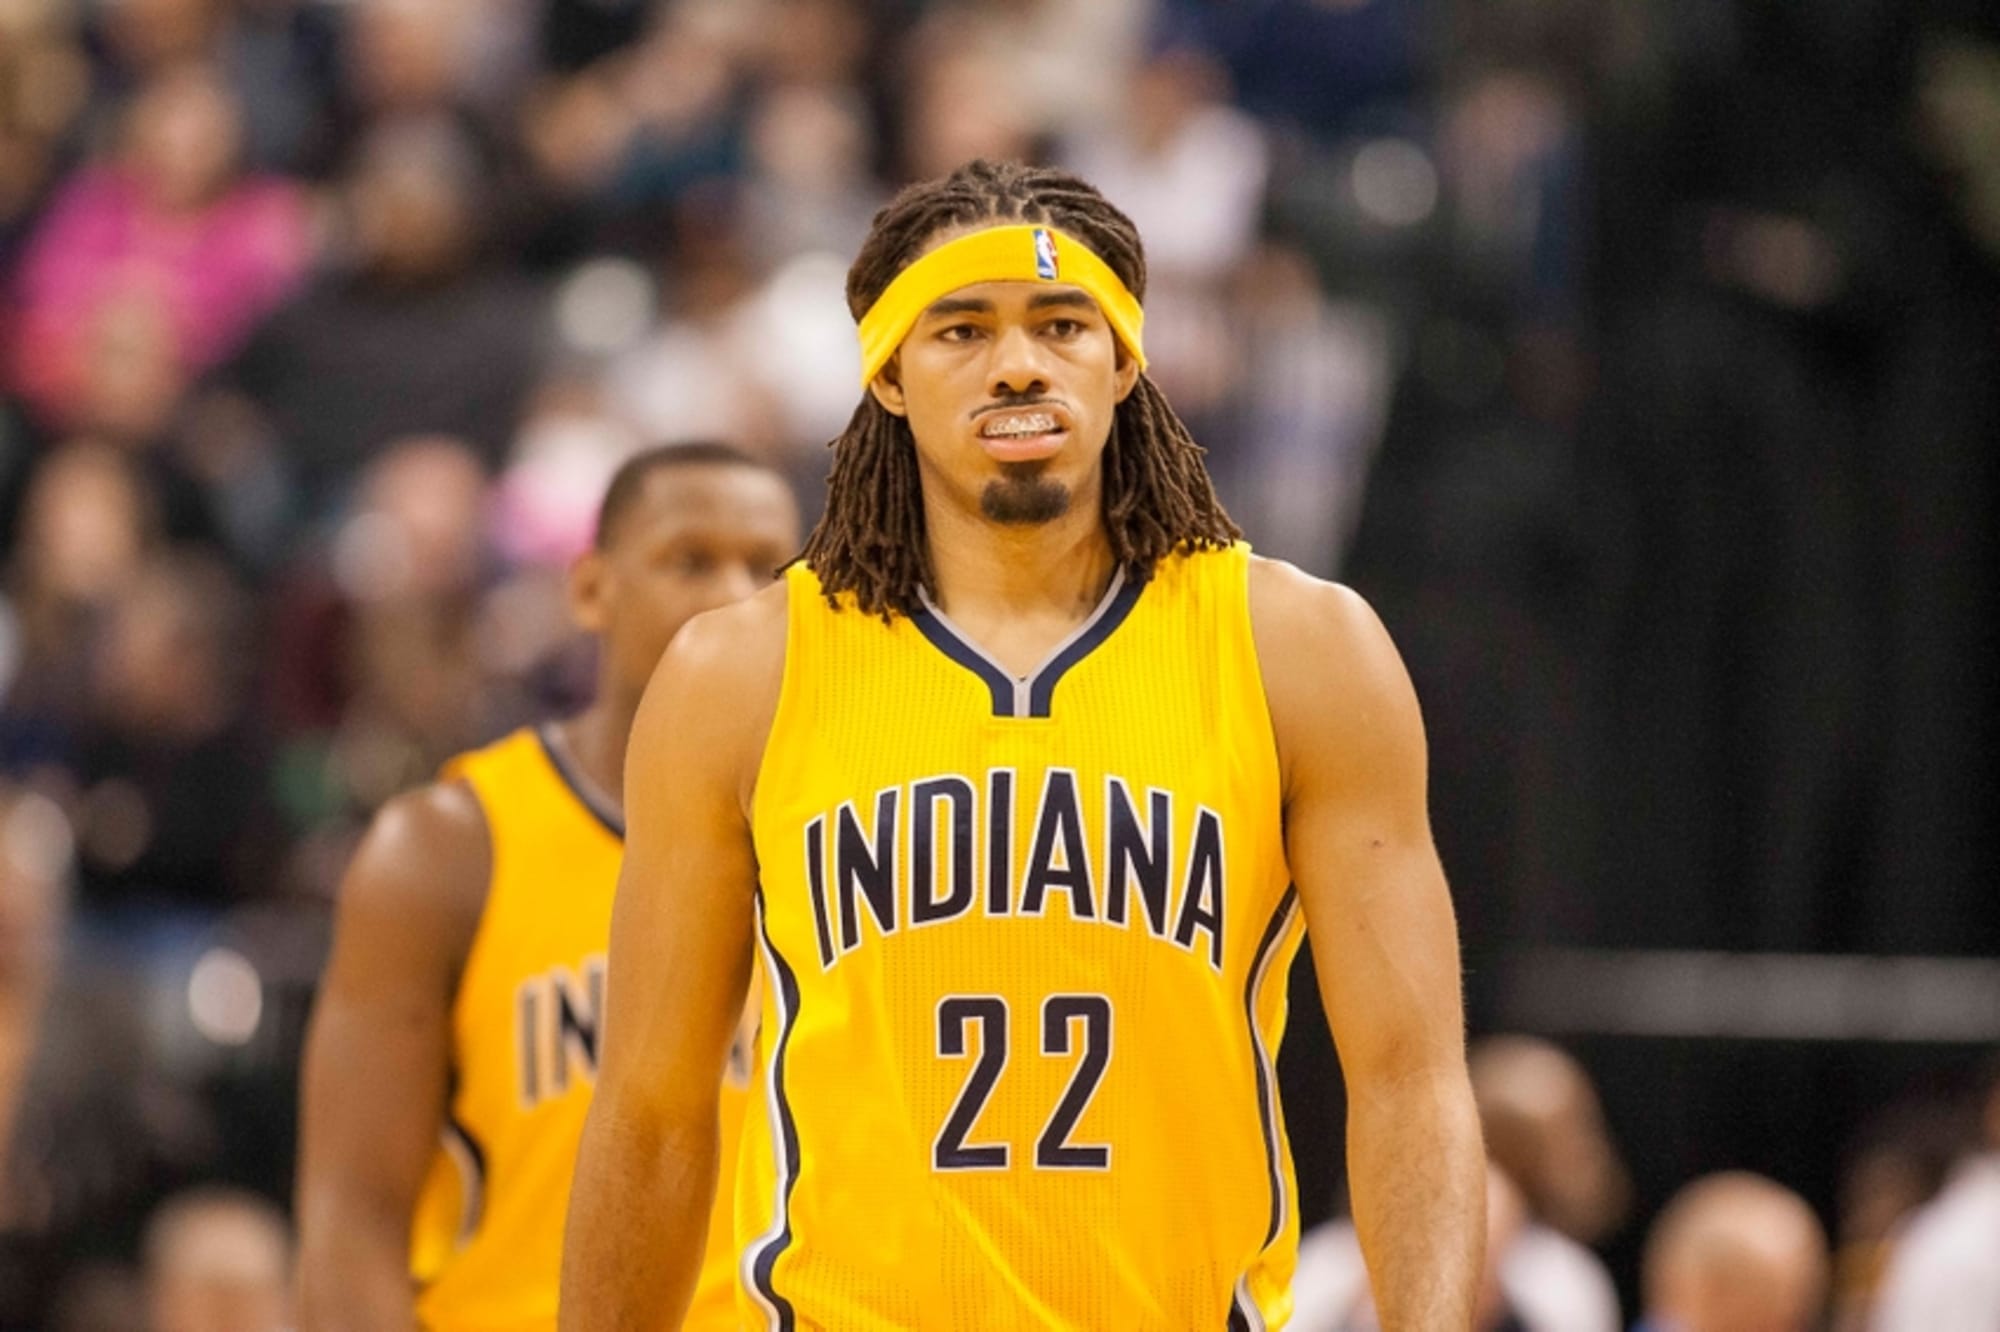 Why do NBA Players wear headbands is it just to make them look